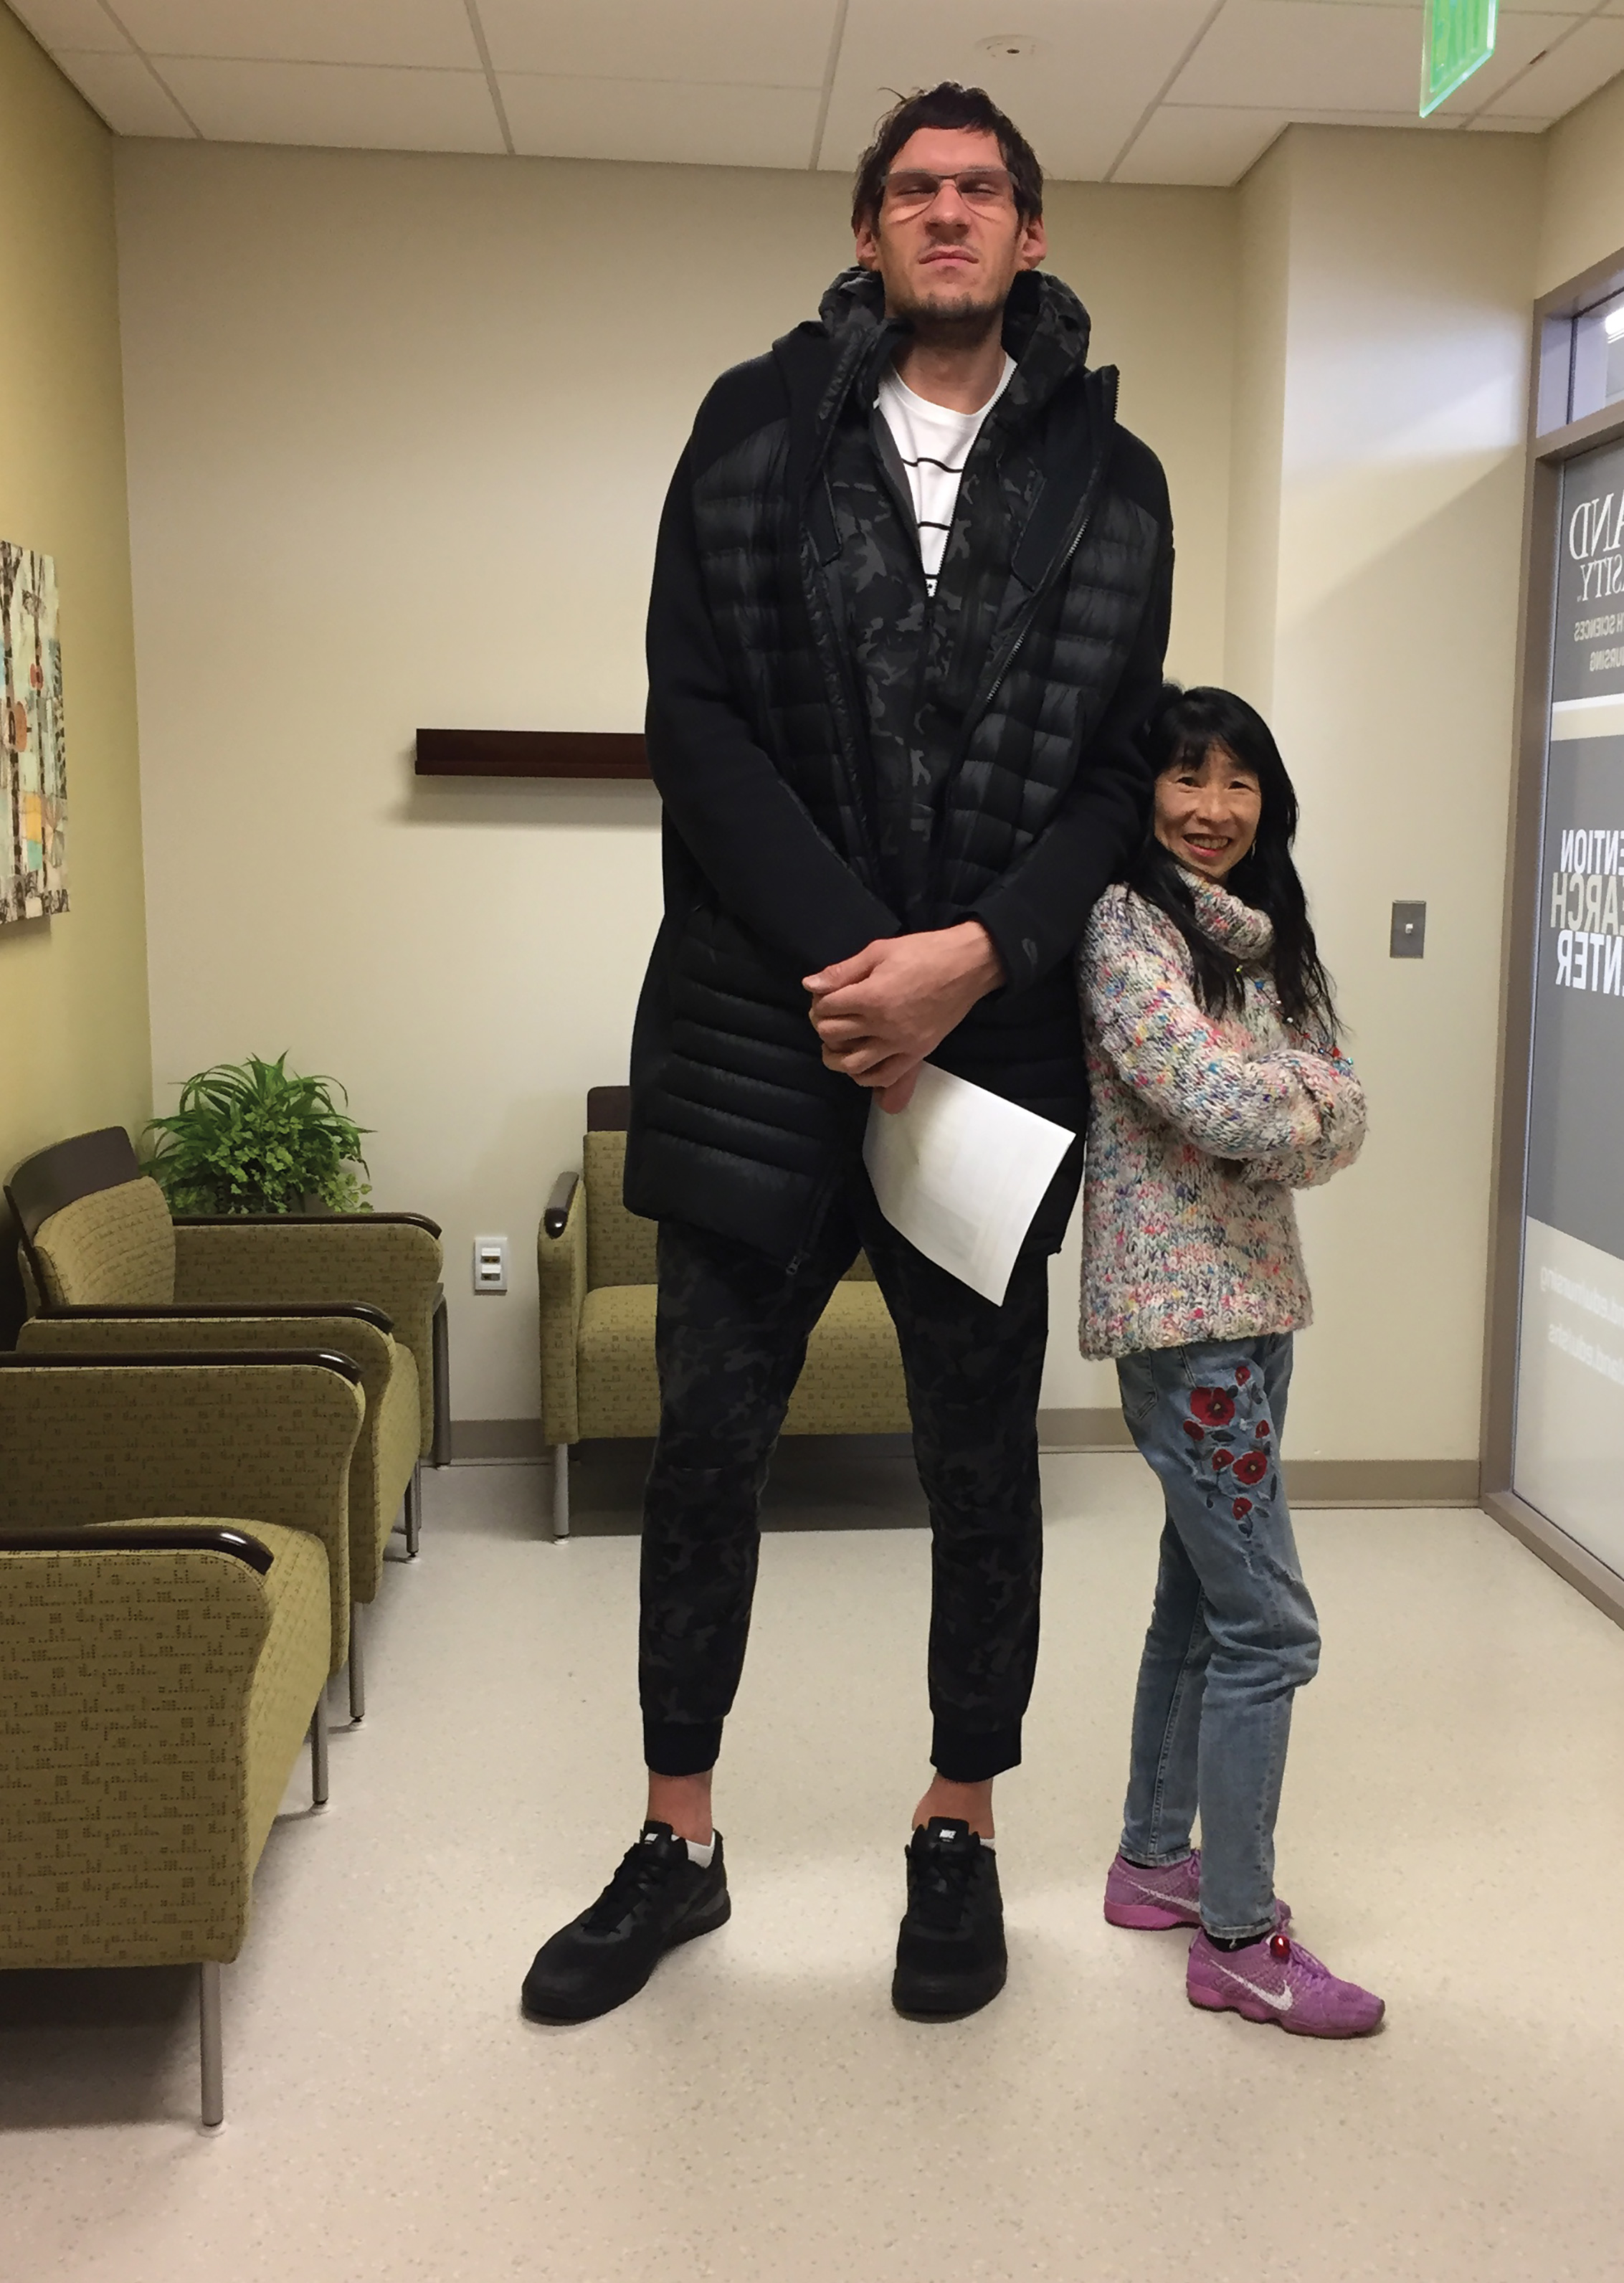 Hew-Butler loves working with professional athletes, including 7’4” Boban Marjanovic, who plays center for the NBA’s Dallas Mavericks.